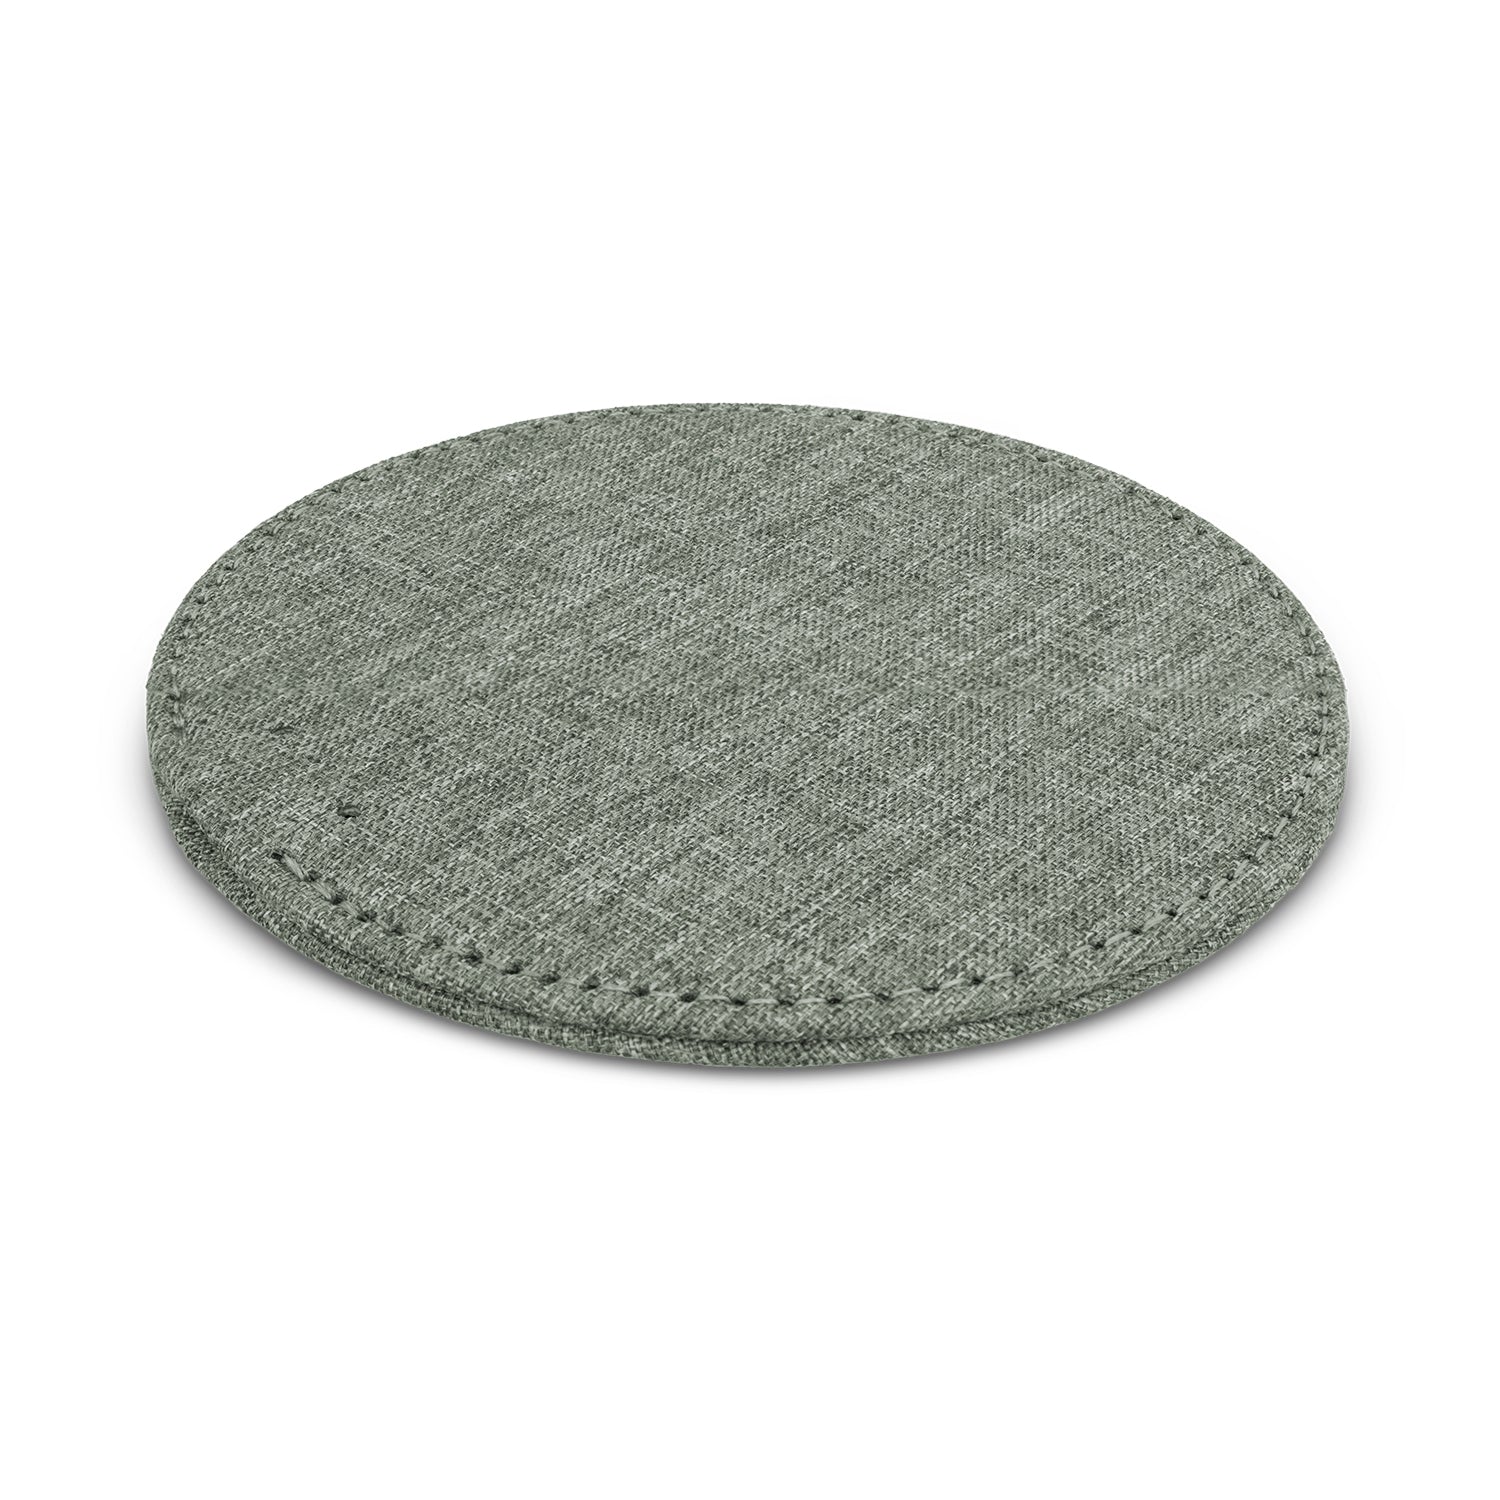 Hadron Wireless Charger Fabric [116331]